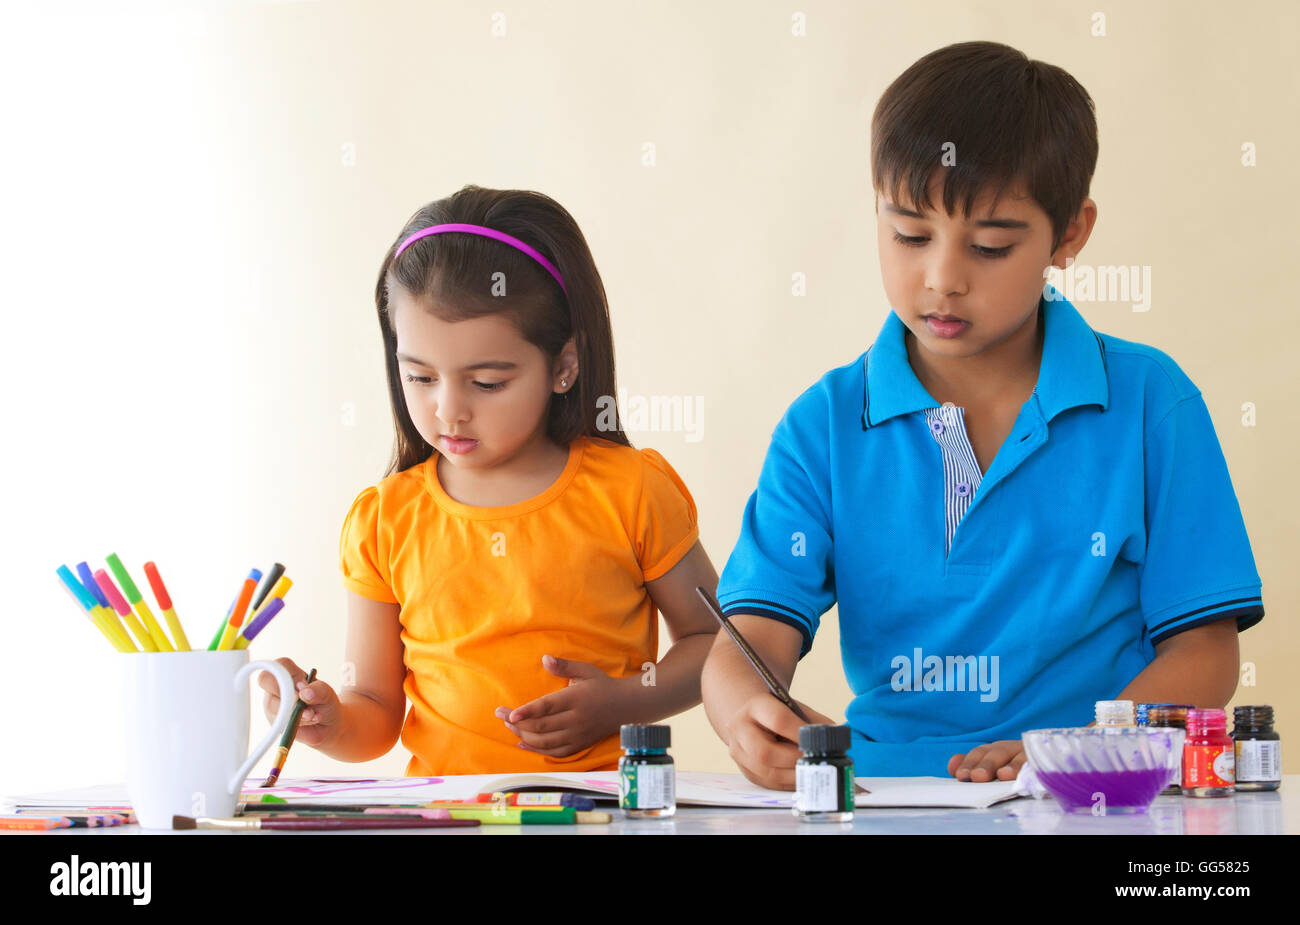 Siblings painting at table against colored background Stock Photo